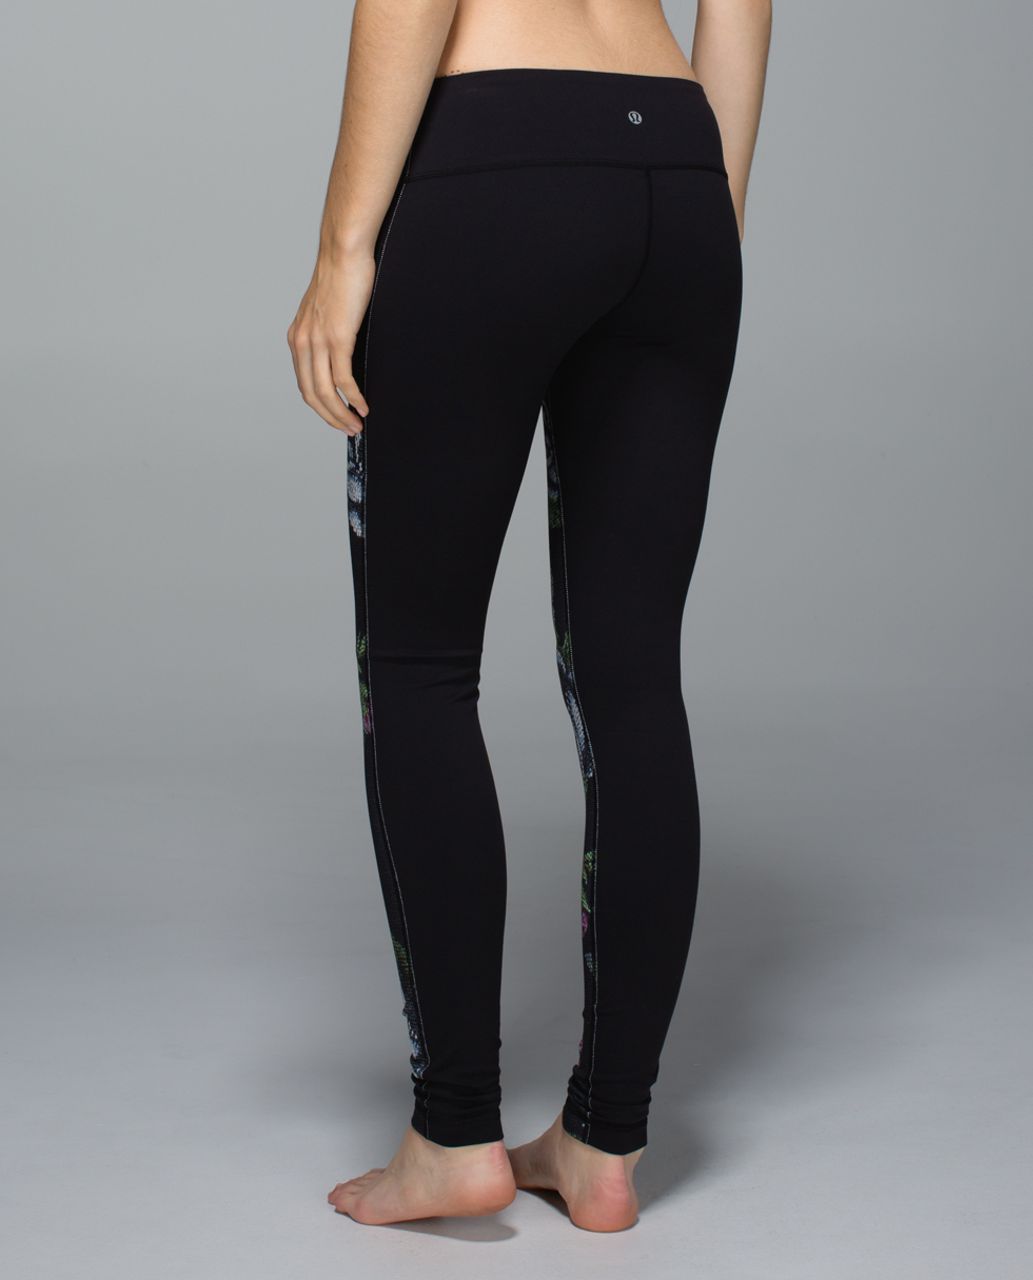 Lululemon Wunder Under Stirrup Pant - Full-On Luon Fabric for Serious  Stretch and Recovery